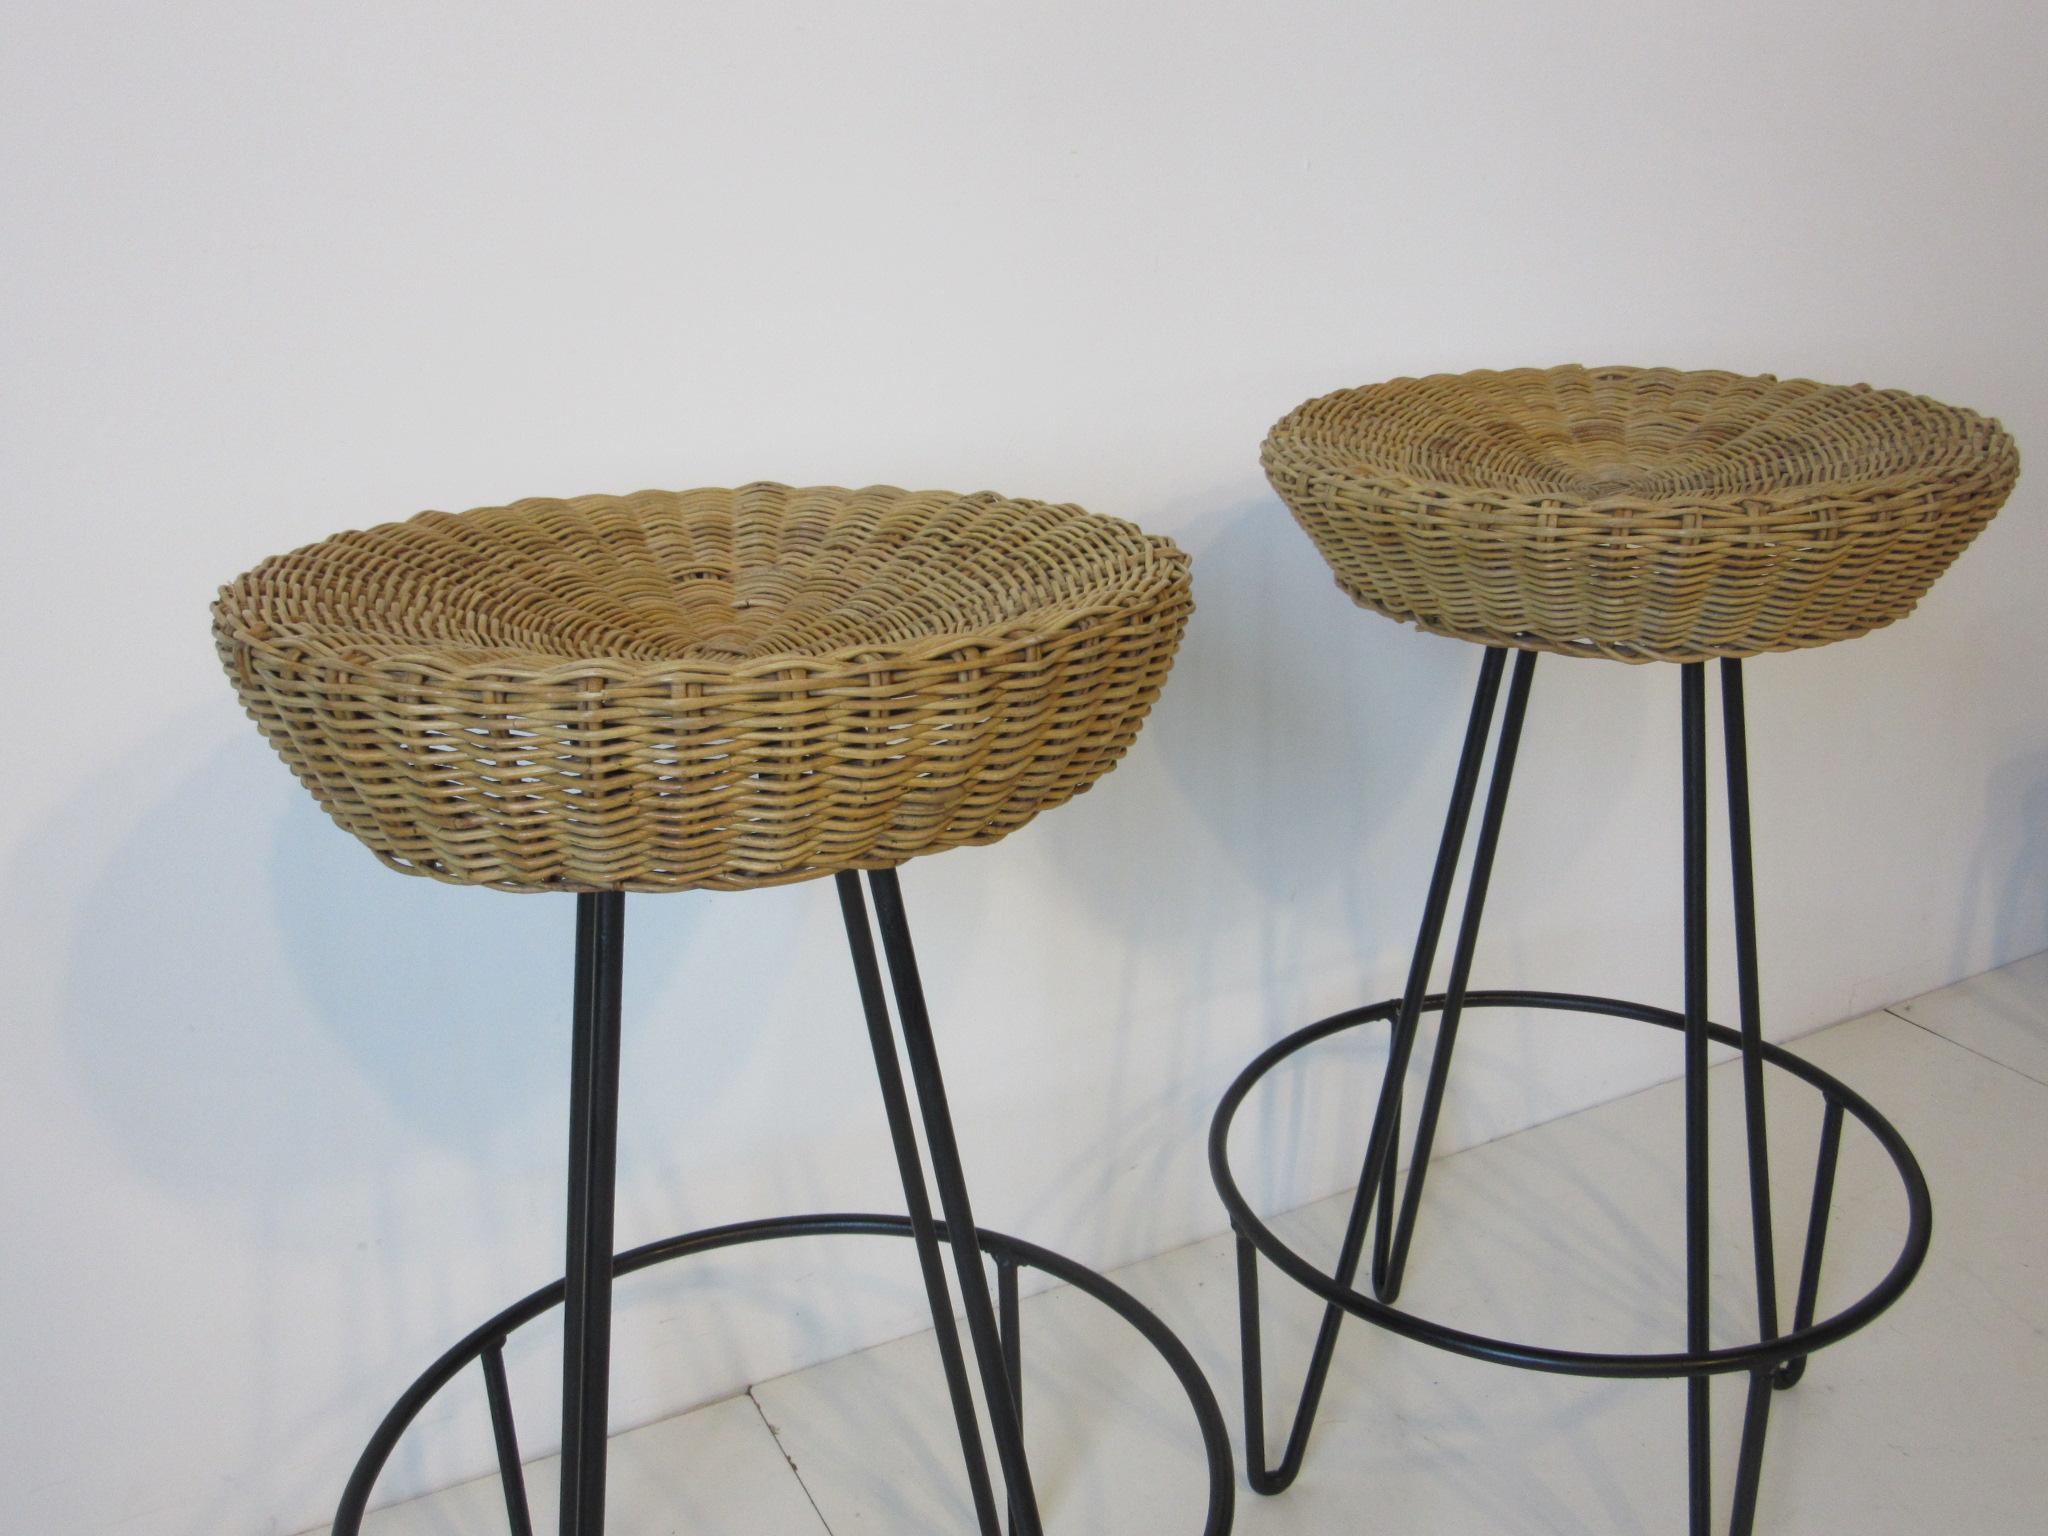 A pair of welded iron based bar stools with foot rests and woven wicker seats a great addition for that tiki bar or casual entertaining area. The measurement for the footrest ring is 18